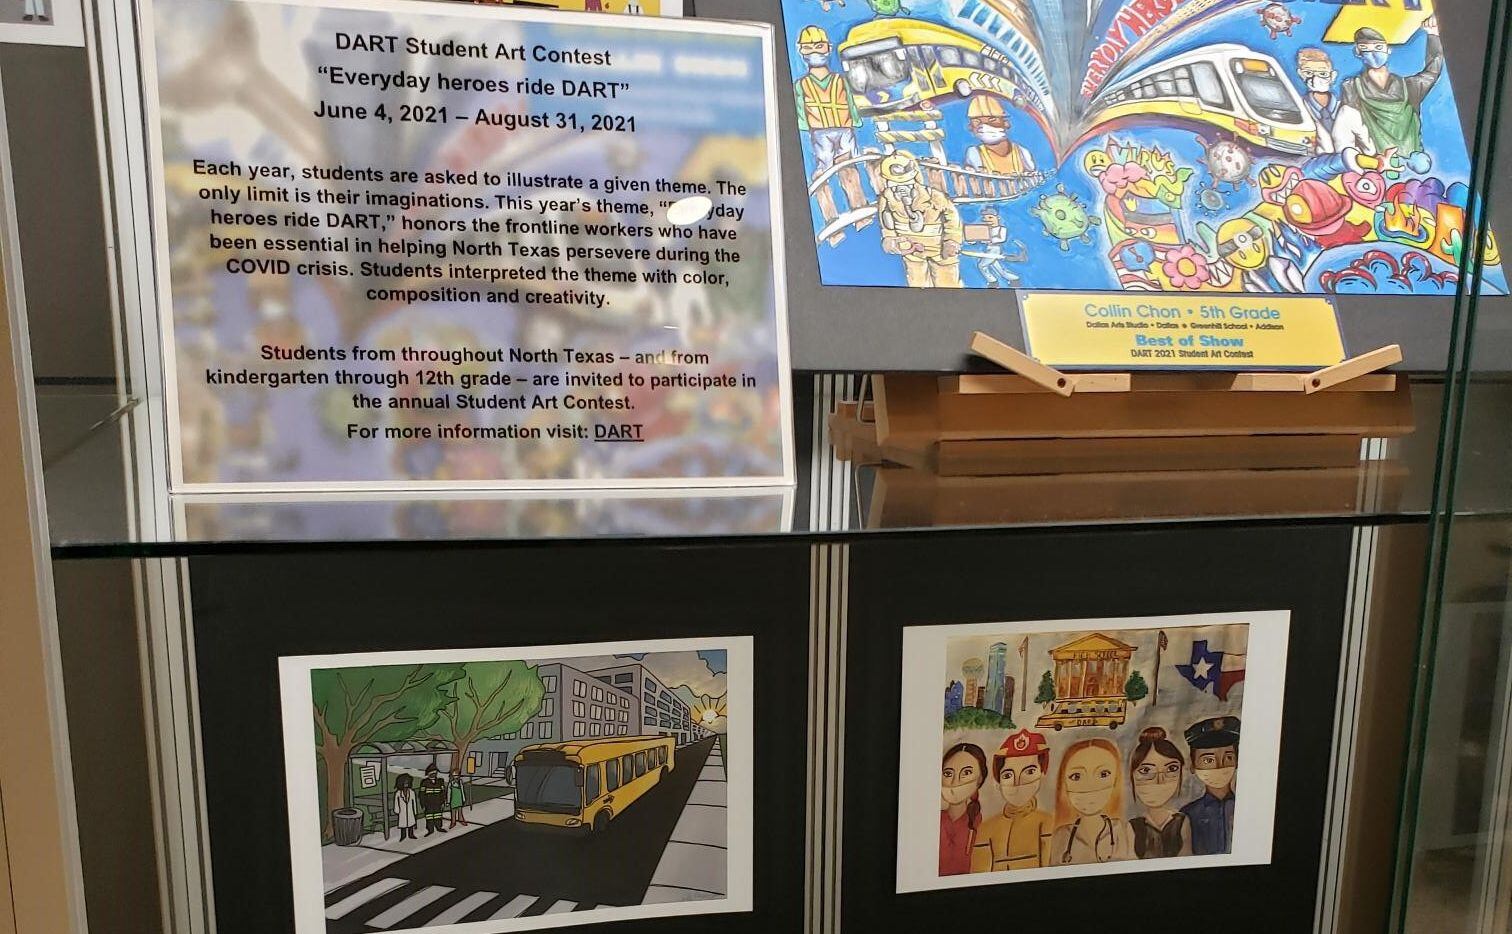 Student paintings, drawings and other designs show a variety of hometown heroes, from doctors and nurses to police and firefighters. The work is on display at Dallas Love Field Airport until Aug. 31.